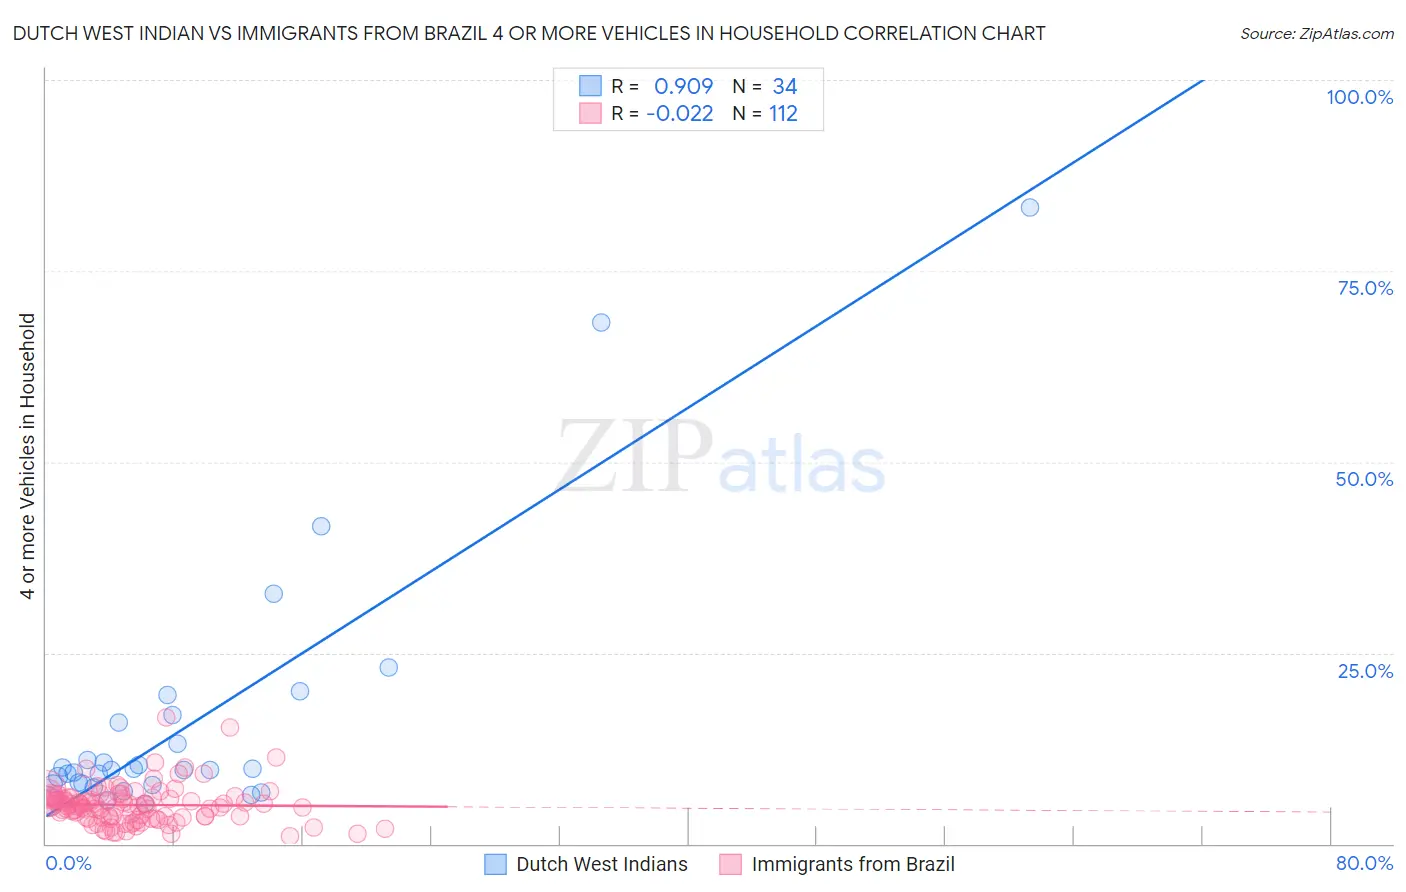 Dutch West Indian vs Immigrants from Brazil 4 or more Vehicles in Household